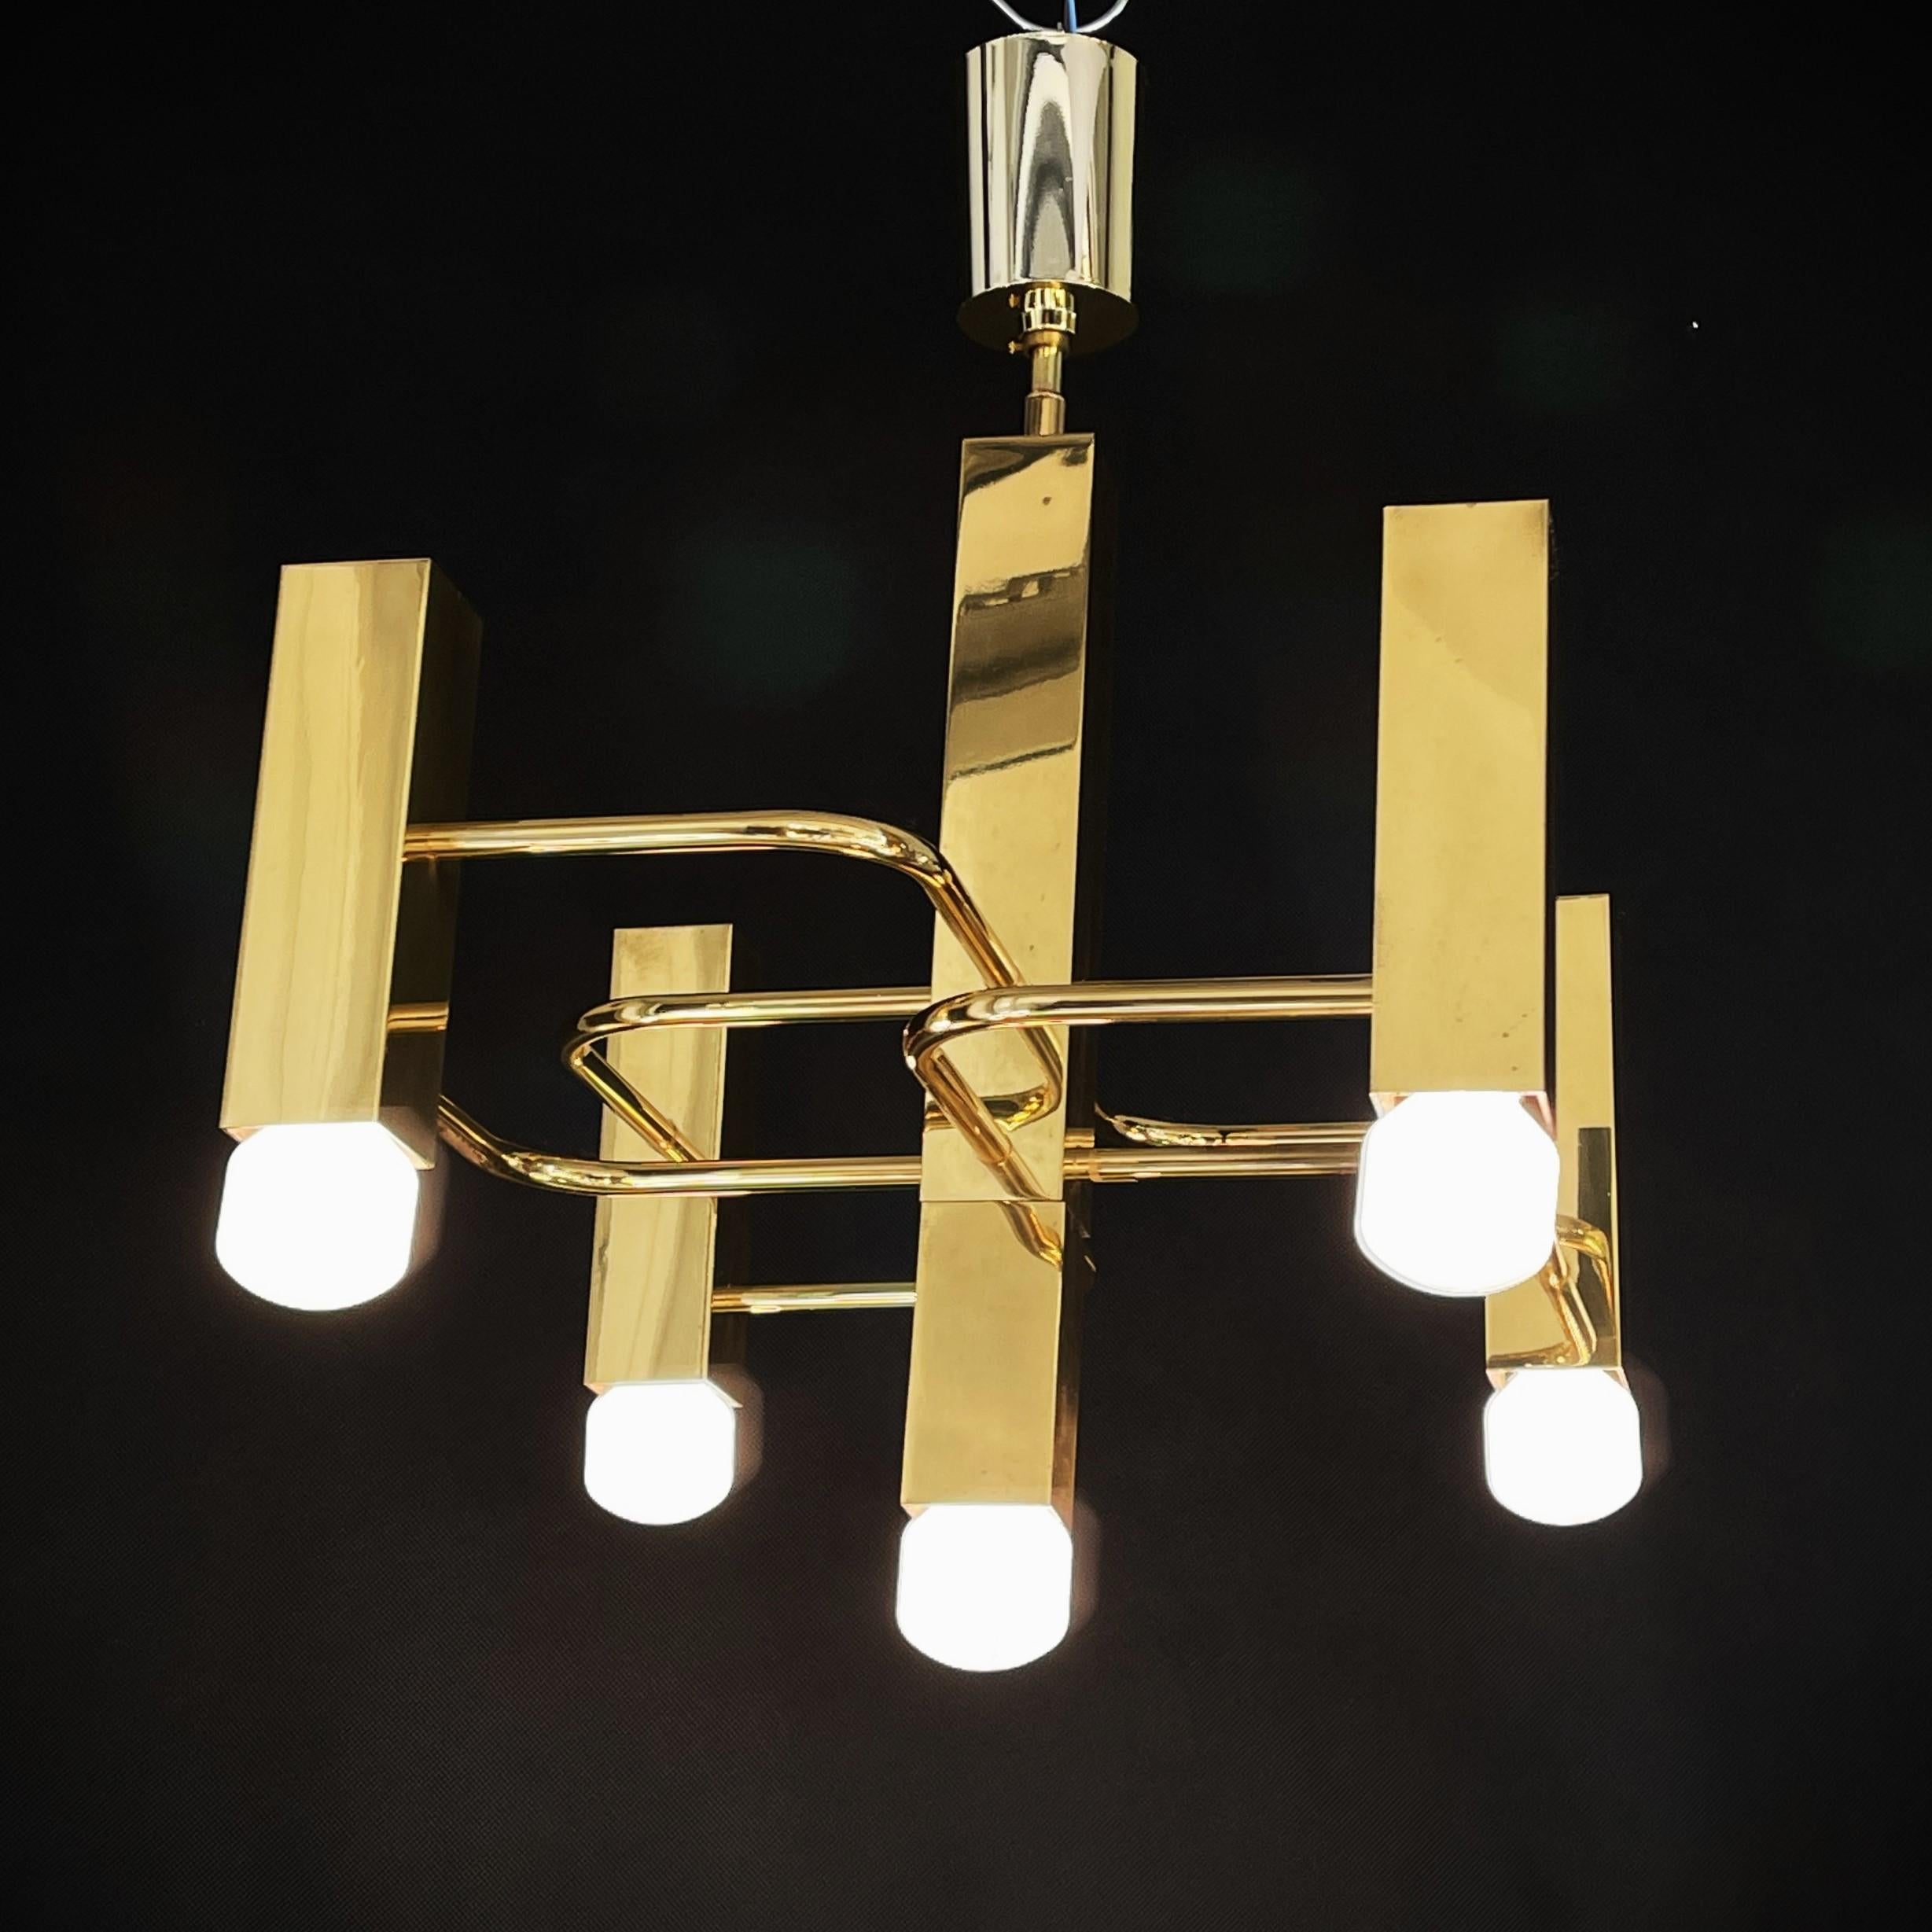 Vintage Ceiling Lamp by Sciolari - 1970s

The ceiling lamp by Gaetano Sciolari, made in 1970, is a truly iconic piece of modern lighting art. The designer, known for his groundbreaking work in the field of lighting, has created a masterpiece here